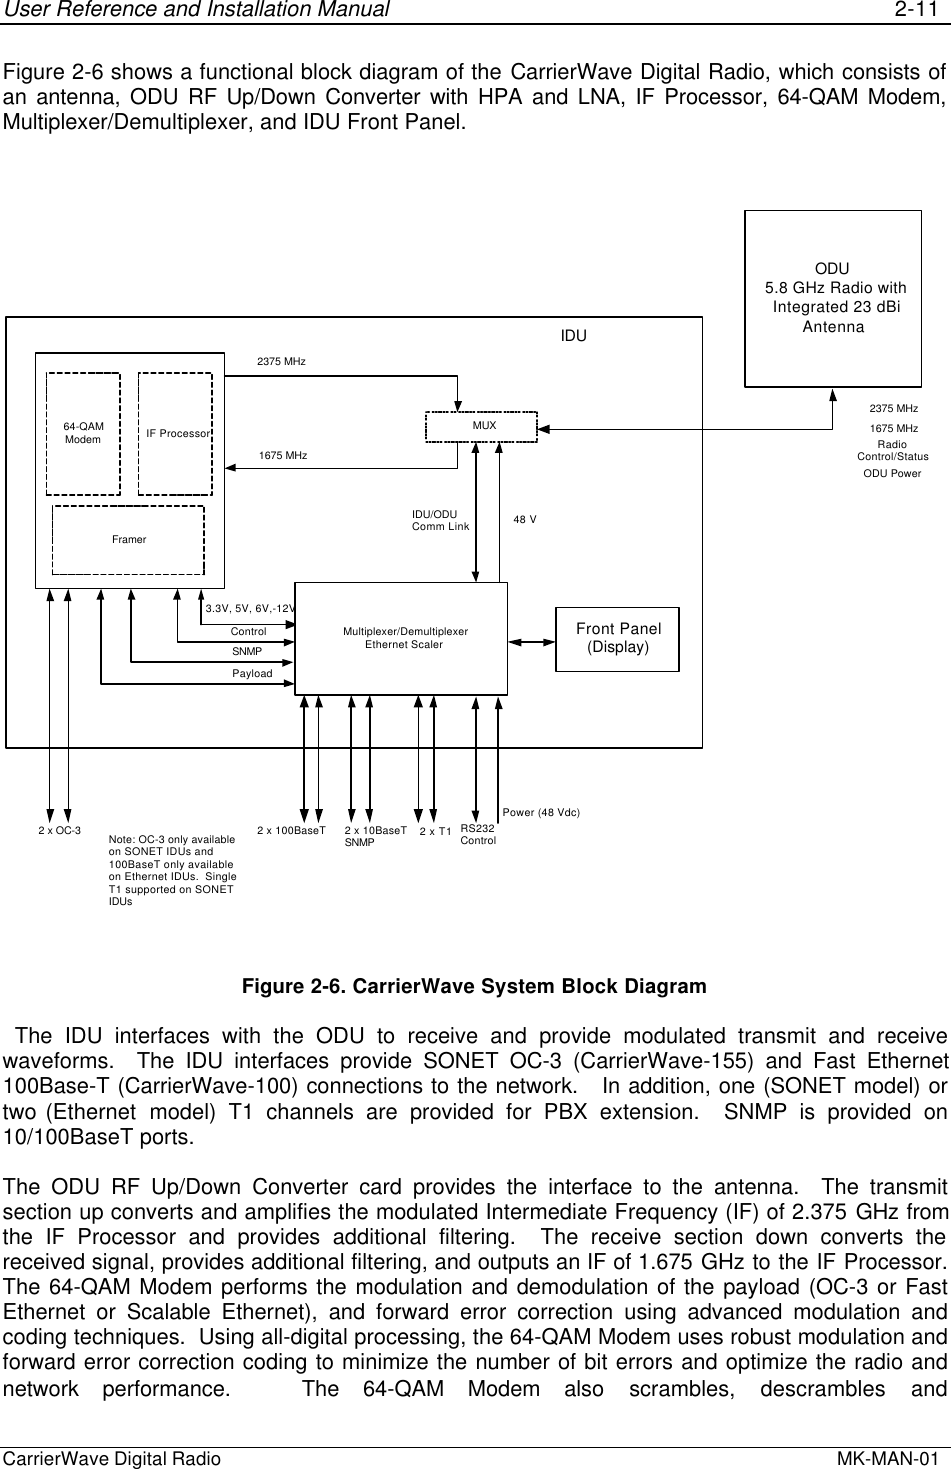 User Reference and Installation Manual 2-11CarrierWave Digital Radio  MK-MAN-01Figure 2-6 shows a functional block diagram of the CarrierWave Digital Radio, which consists ofan antenna, ODU RF Up/Down Converter with HPA and LNA, IF Processor, 64-QAM Modem,Multiplexer/Demultiplexer, and IDU Front Panel.Front Panel(Display)2 x 10BaseTSNMP1675 MHz2375 MHzControlODU5.8 GHz Radio withIntegrated 23 dBiAntennaRadioControl/StatusSNMPPayloadPower (48 Vdc)IDU/ODUComm Link2375 MHz1675 MHzODU Power  MUX3.3V, 5V, 6V,-12V2 x OC-3 2 x 100BaseT RS232ControlMultiplexer/DemultiplexerEthernet ScalerIF Processor64-QAMModemFramer48 V2 x T1Note: OC-3 only availableon SONET IDUs and100BaseT only availableon Ethernet IDUs.  SingleT1 supported on SONETIDUsIDUFigure 2-6. CarrierWave System Block Diagram The IDU interfaces with the ODU to receive and provide modulated transmit and receivewaveforms.  The IDU interfaces provide SONET OC-3 (CarrierWave-155) and Fast Ethernet100Base-T (CarrierWave-100) connections to the network.   In addition, one (SONET model) ortwo (Ethernet  model) T1 channels are provided for PBX extension.  SNMP is provided on10/100BaseT ports.The ODU RF Up/Down Converter card provides the interface to the antenna.  The transmitsection up converts and amplifies the modulated Intermediate Frequency (IF) of 2.375 GHz fromthe IF Processor and provides additional filtering.  The receive section down converts thereceived signal, provides additional filtering, and outputs an IF of 1.675 GHz to the IF Processor.The 64-QAM Modem performs the modulation and demodulation of the payload (OC-3 or FastEthernet or Scalable Ethernet), and forward error correction using advanced modulation andcoding techniques.  Using all-digital processing, the 64-QAM Modem uses robust modulation andforward error correction coding to minimize the number of bit errors and optimize the radio andnetwork performance.   The 64-QAM Modem also scrambles,  descrambles and